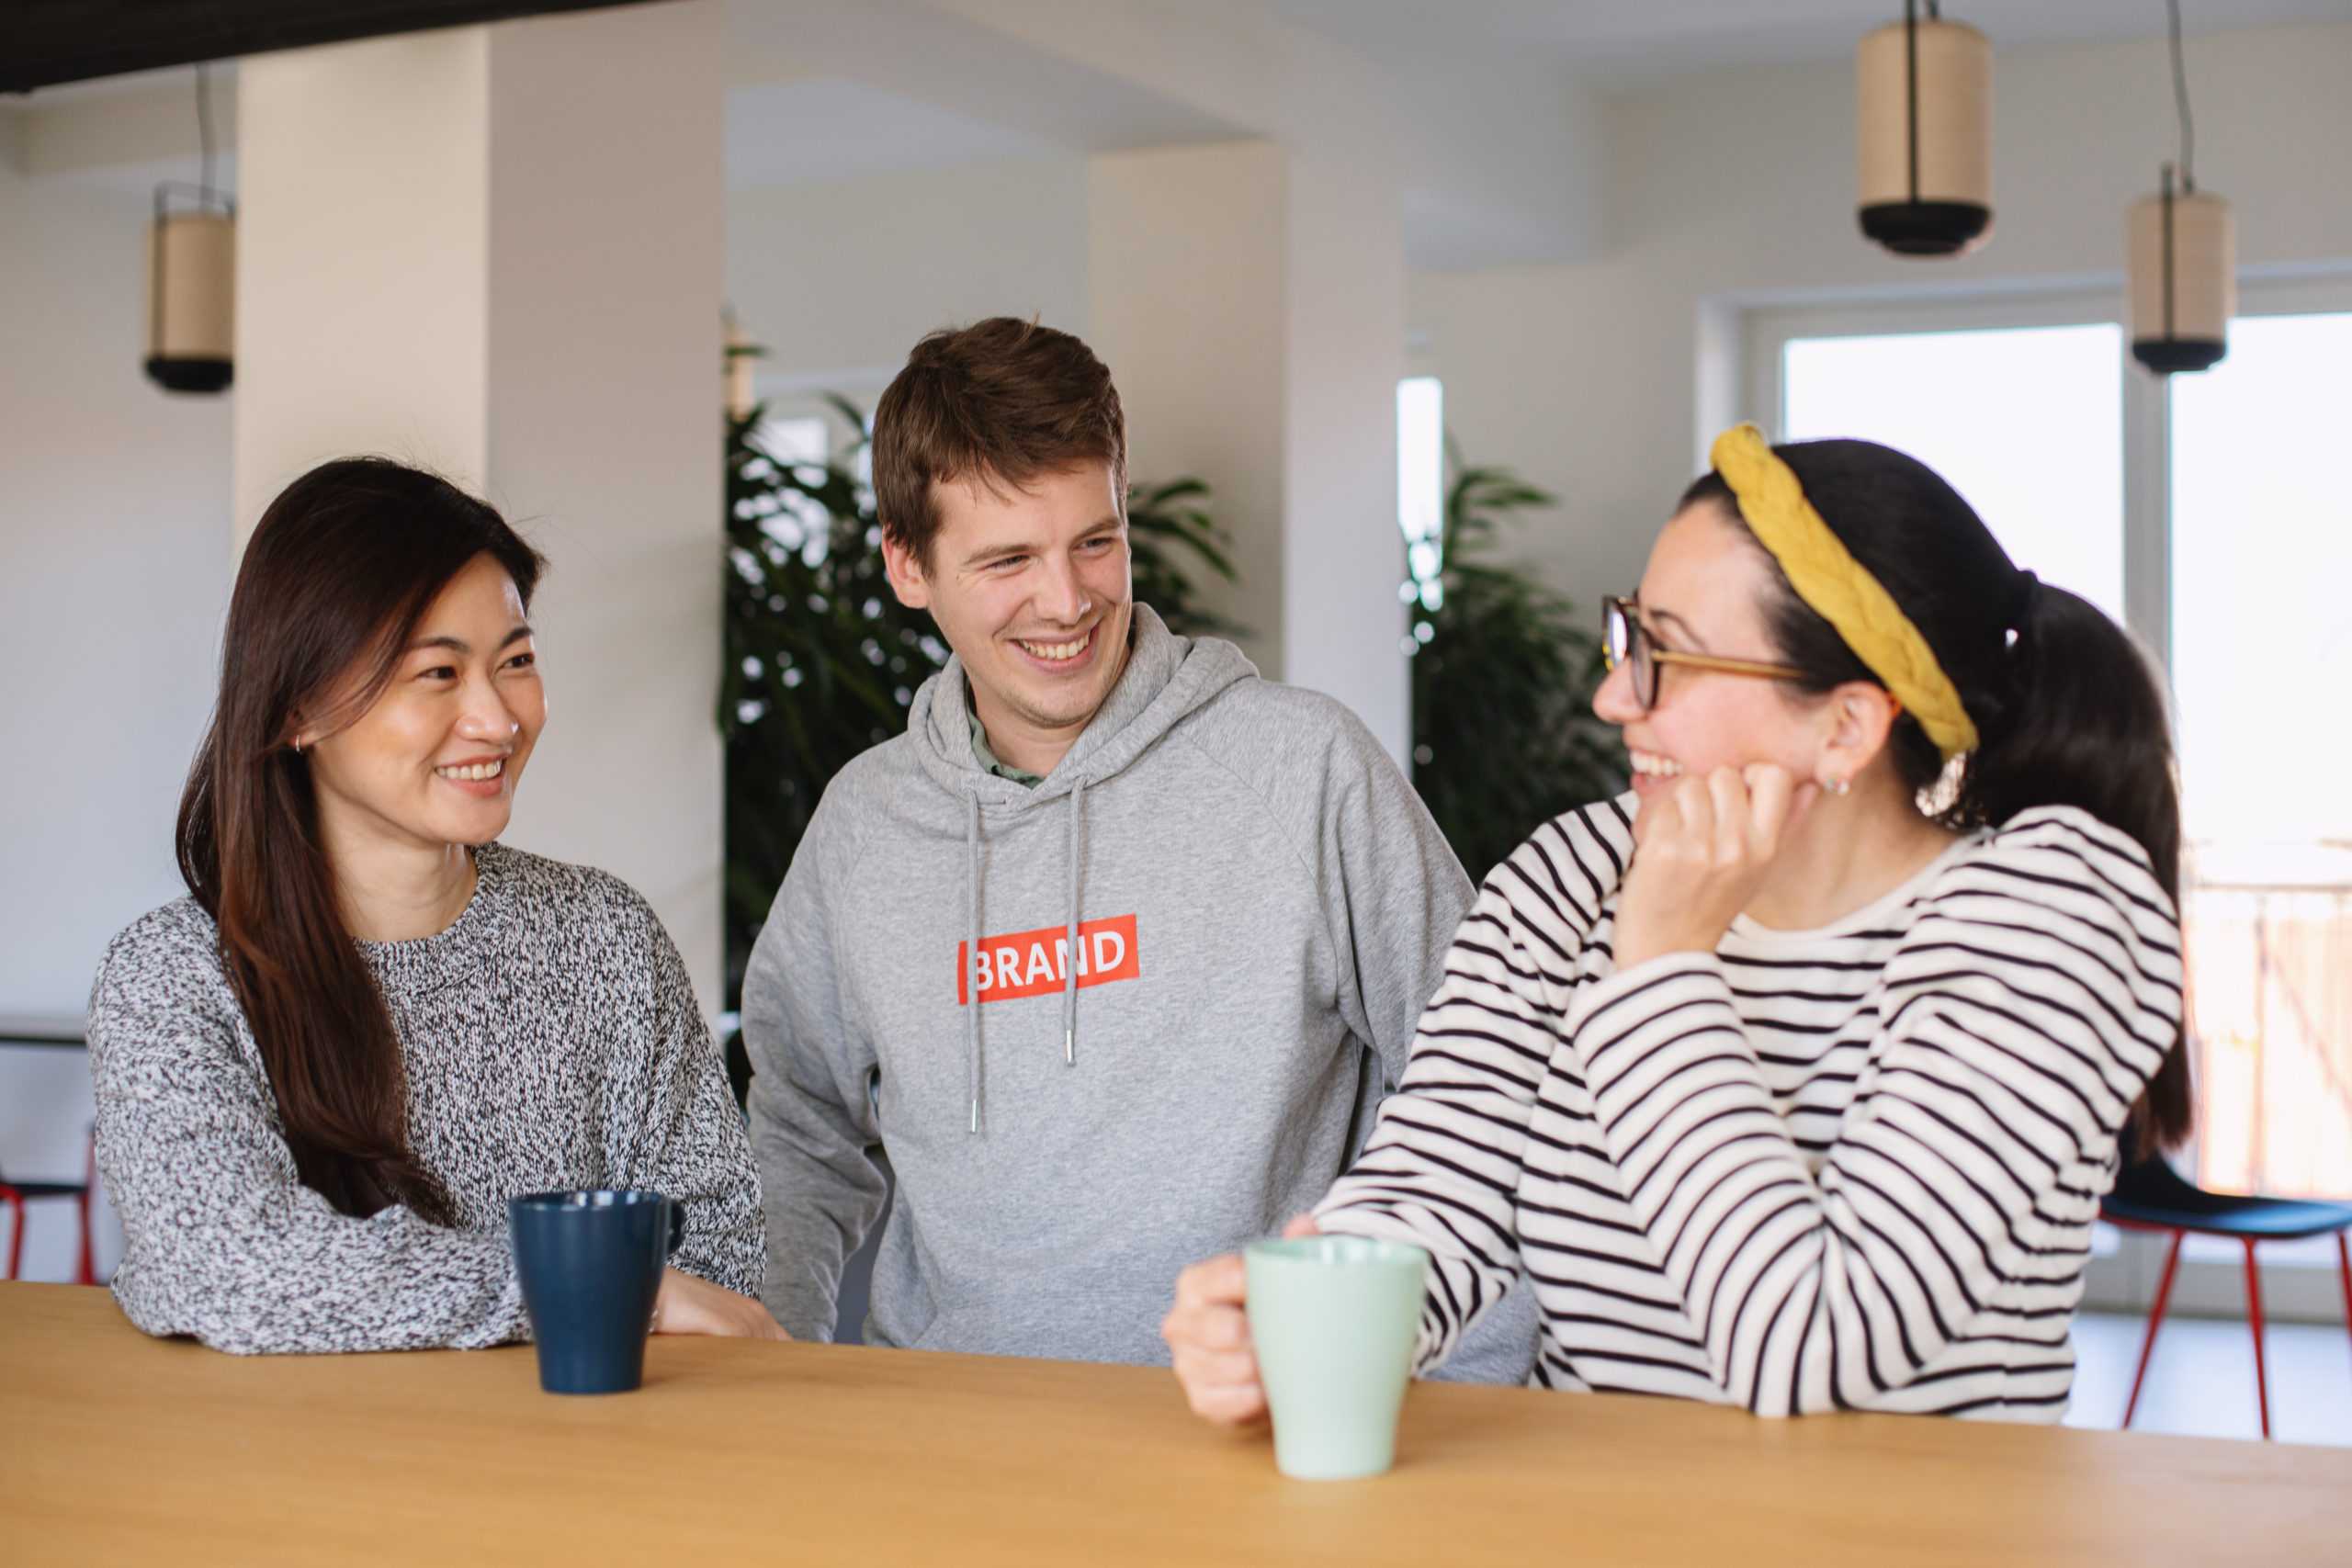 First impressions count! We hear from three of the newest Brand Team employees on what it’s like to join the growing Delivery Hero family